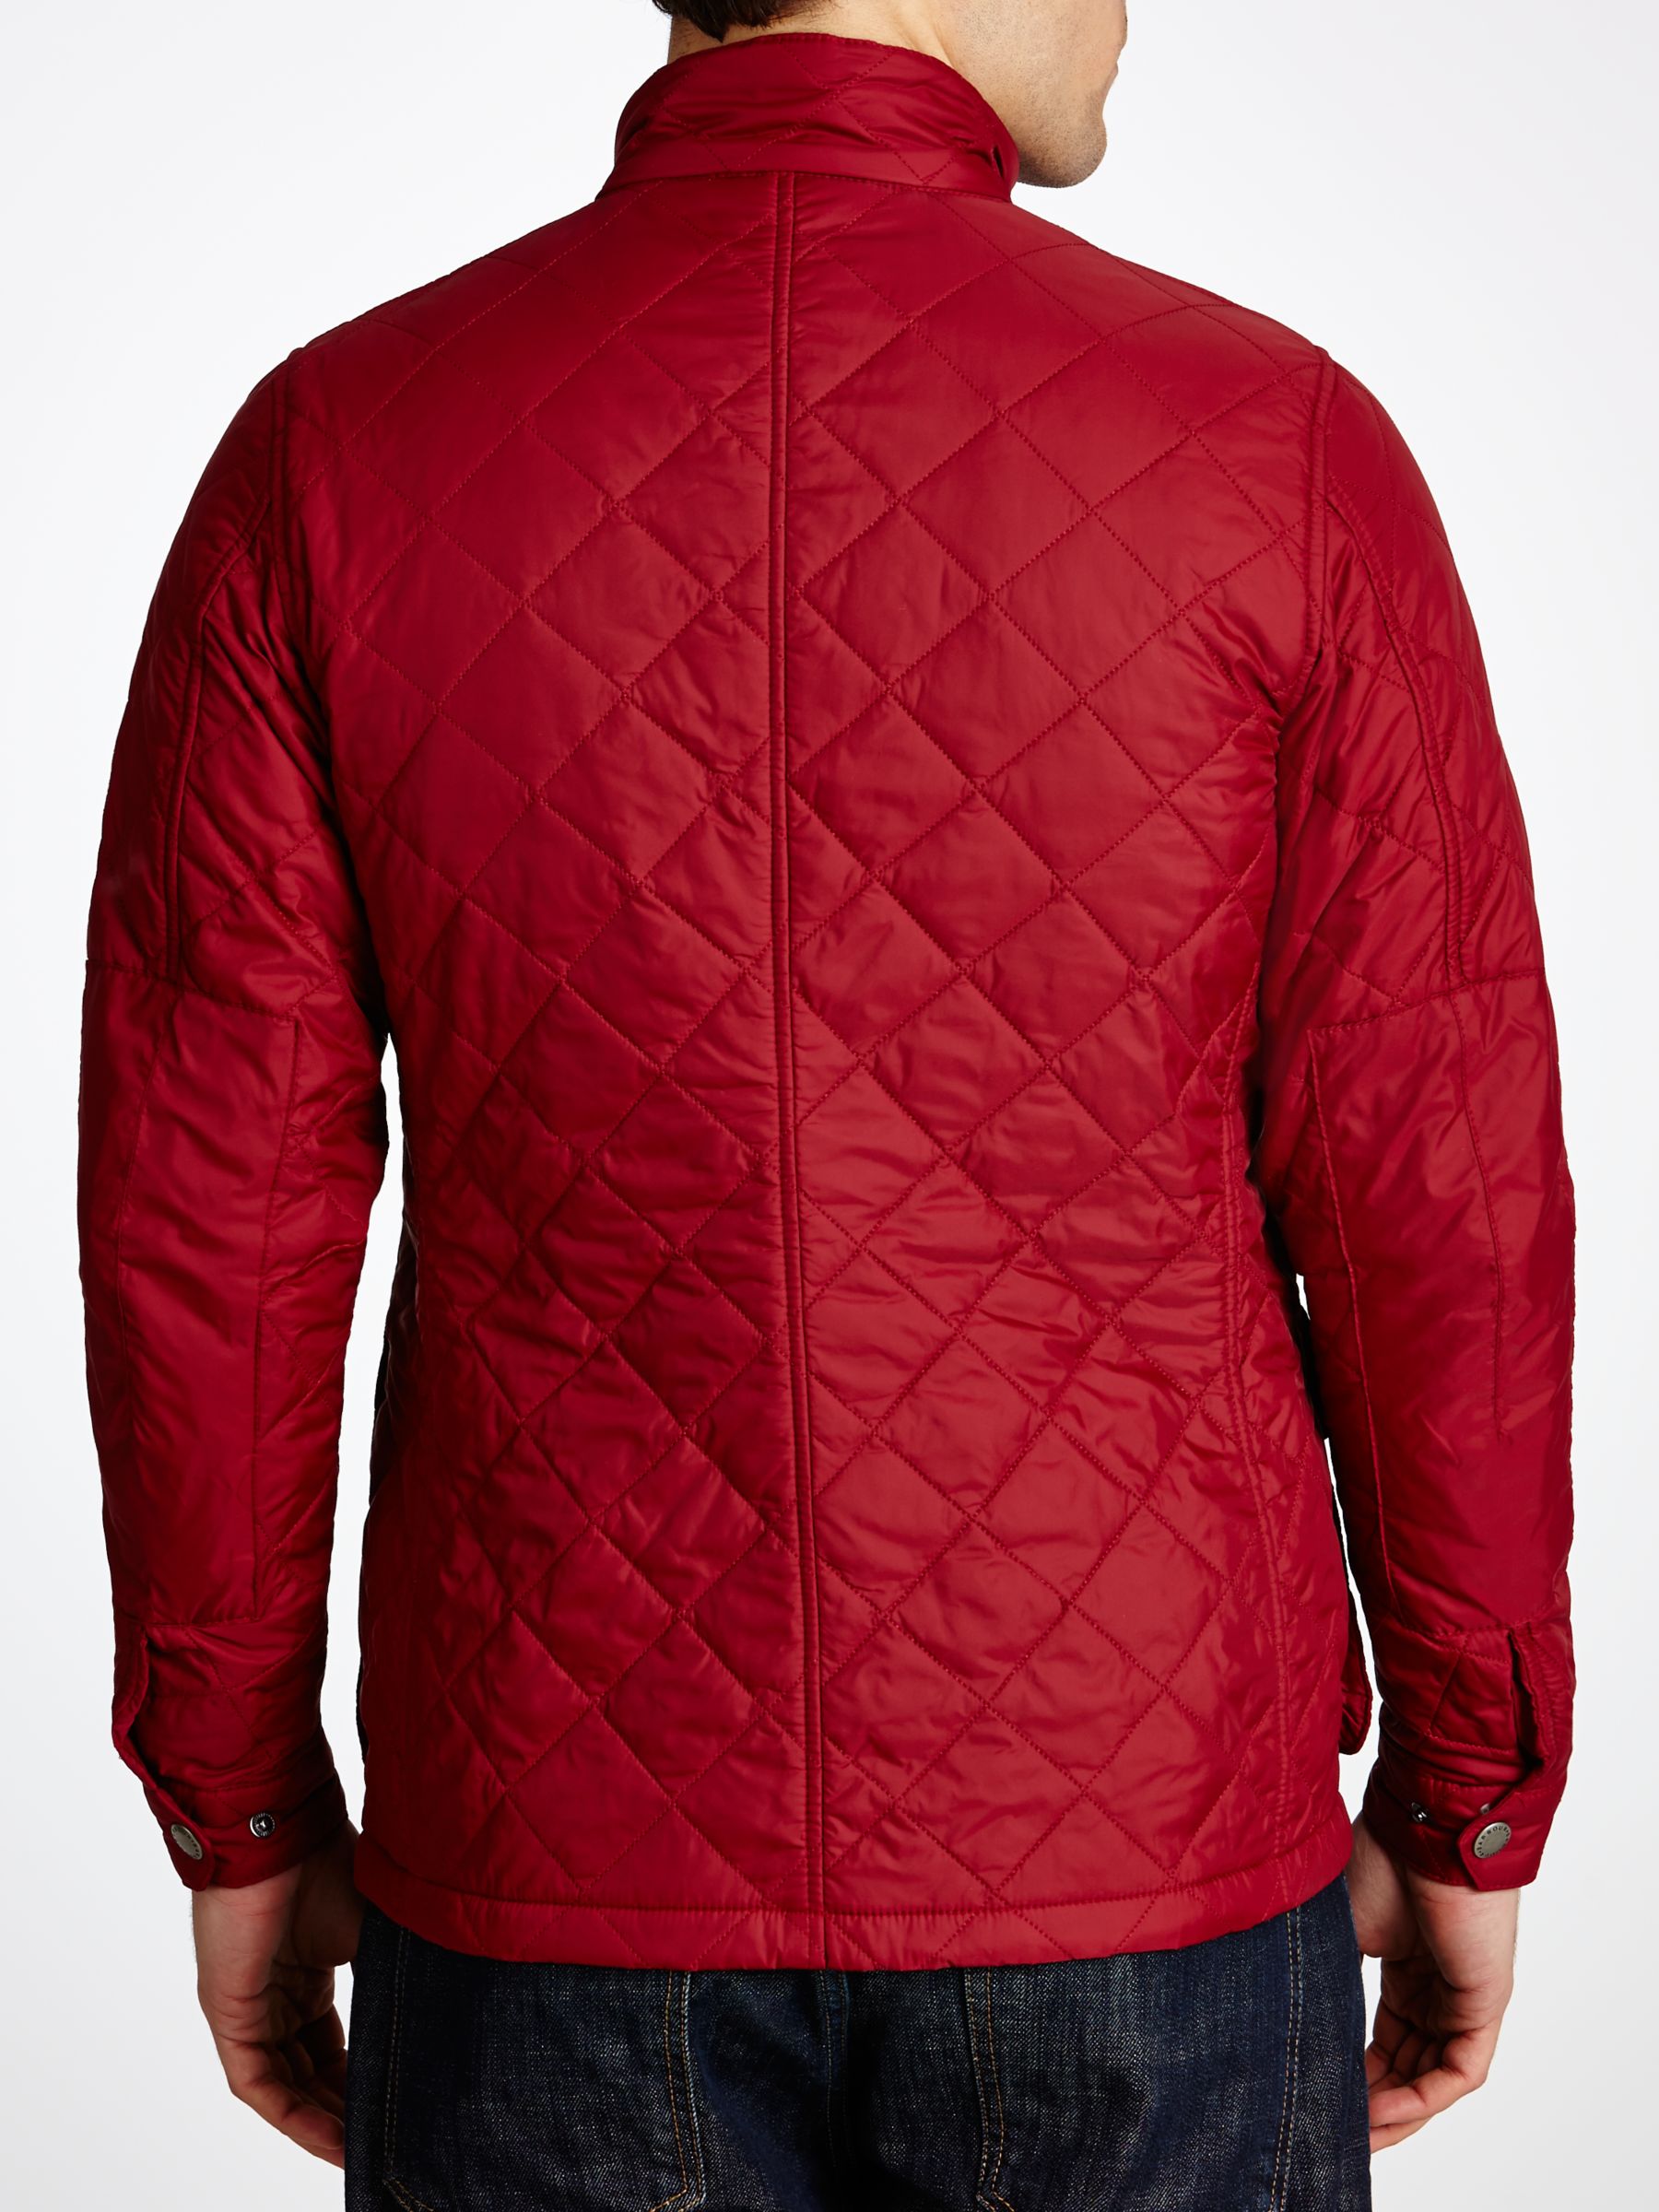 barbour red puffer jacket